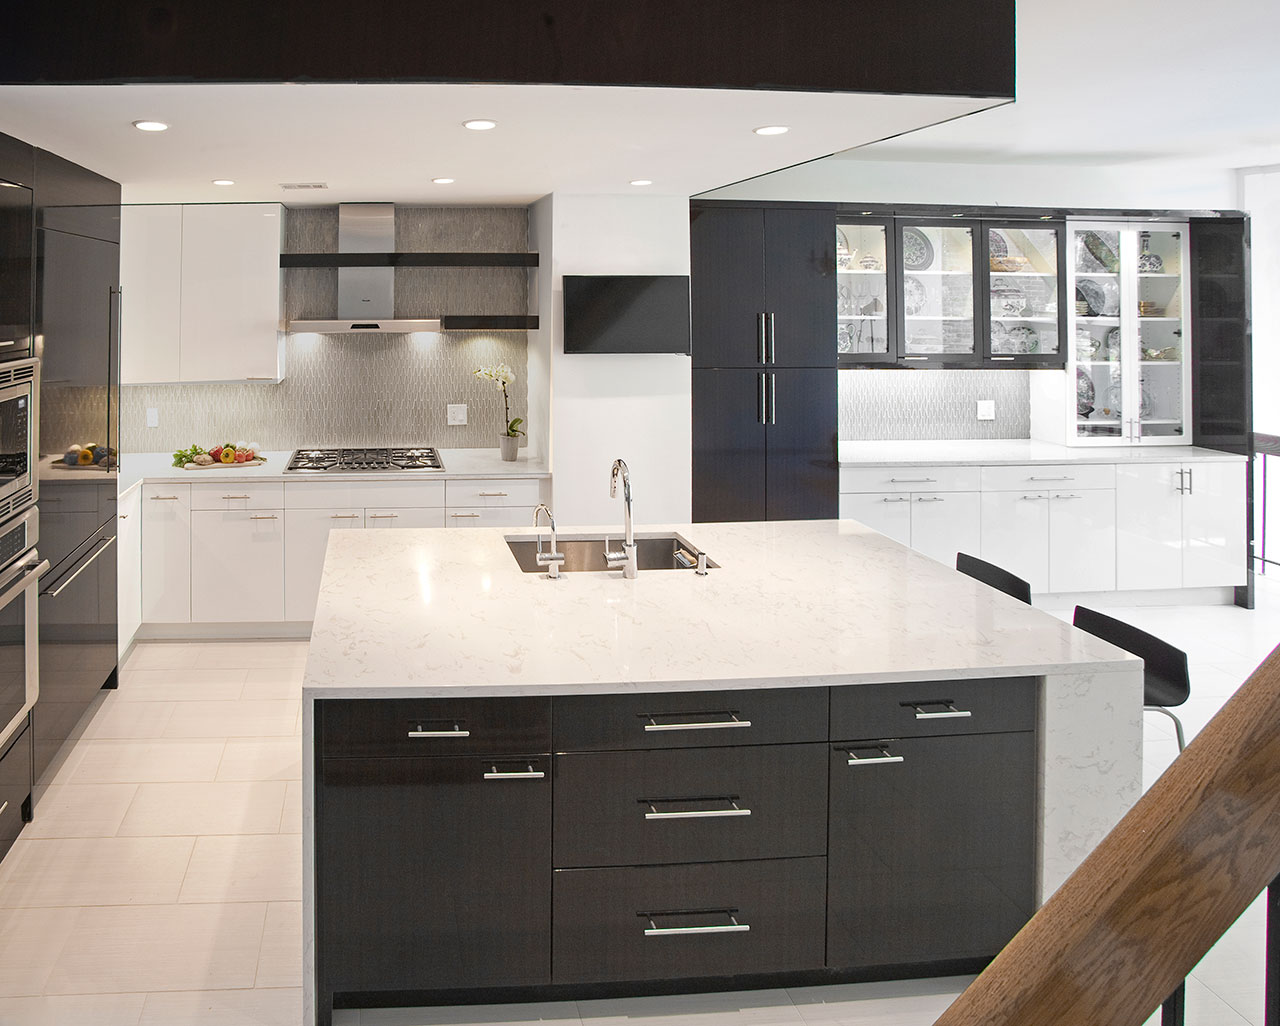 Contemporary Kitchens Designs | Greater Phila. Area ...